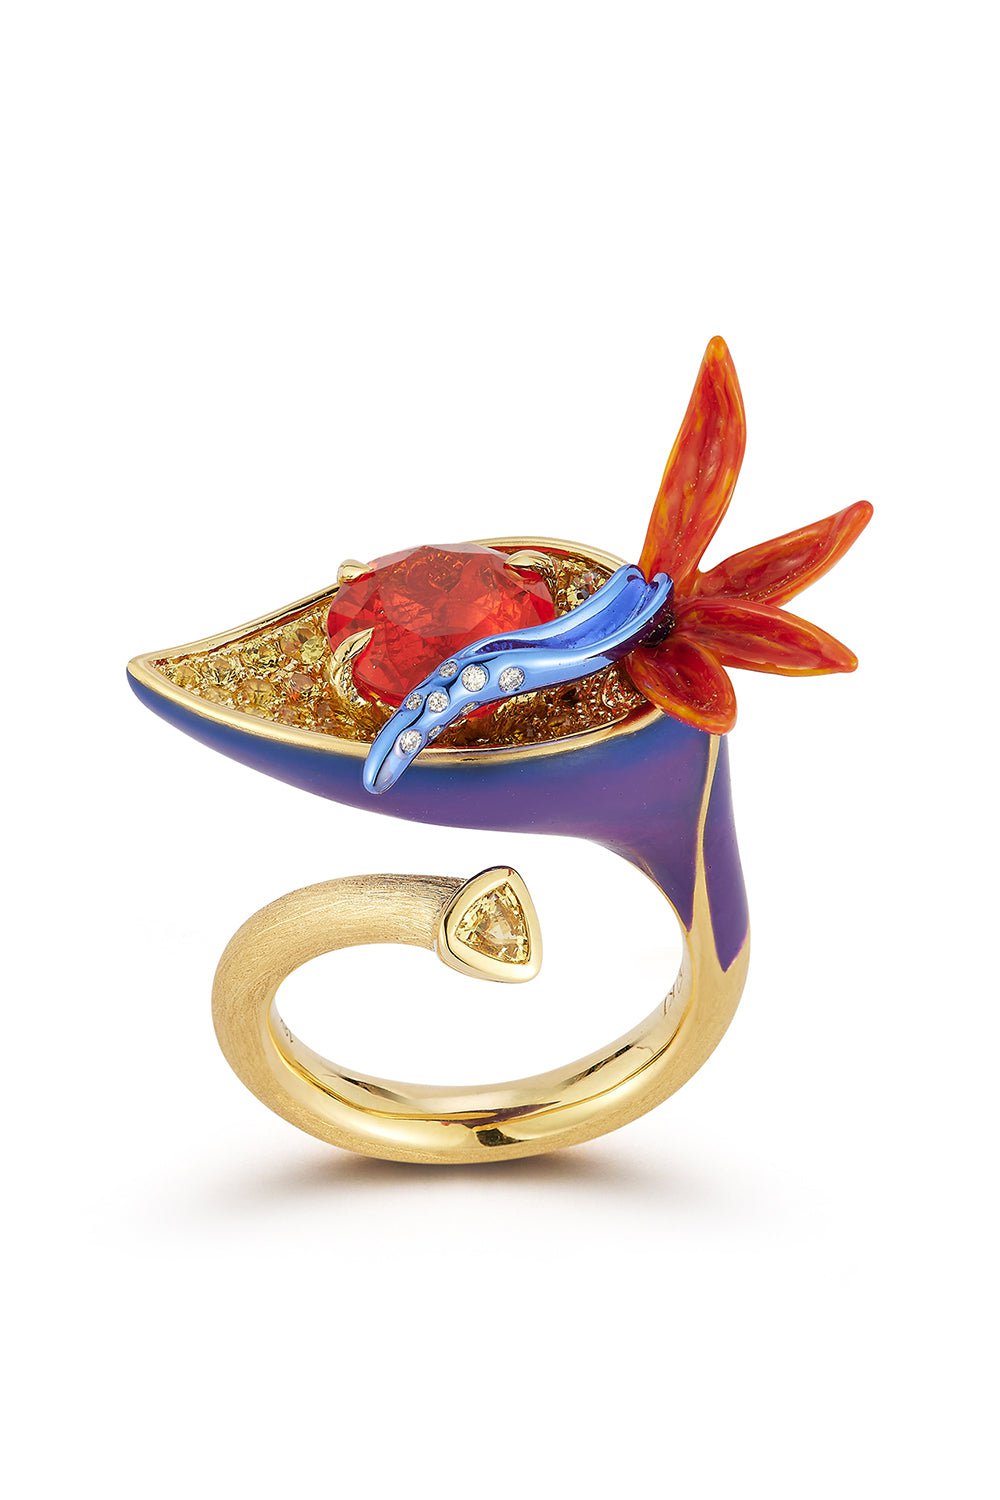 KATHERINE JETTER-The Fiery Bird of Paradise Ring-YELLOW GOLD